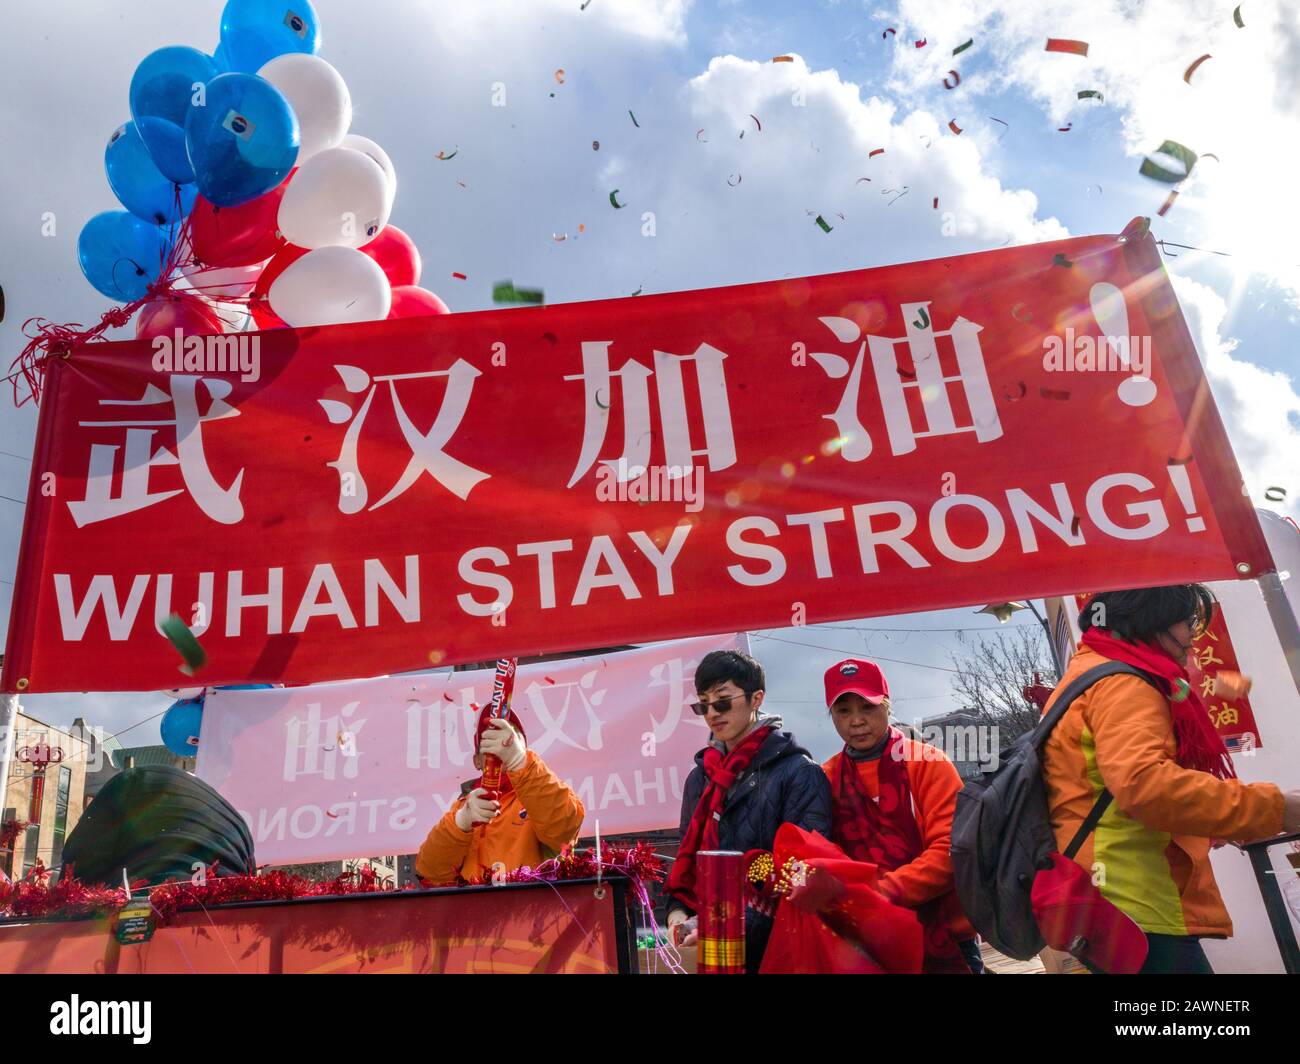 New York, USA. 9th Feb, 2020. A message supporting Wuhan, the city where the current coronavirus epidemic originated, is displayed during the Chinese New Year parade in Chinatown. Credit: Enrique Shore/Alamy Live News Stock Photo